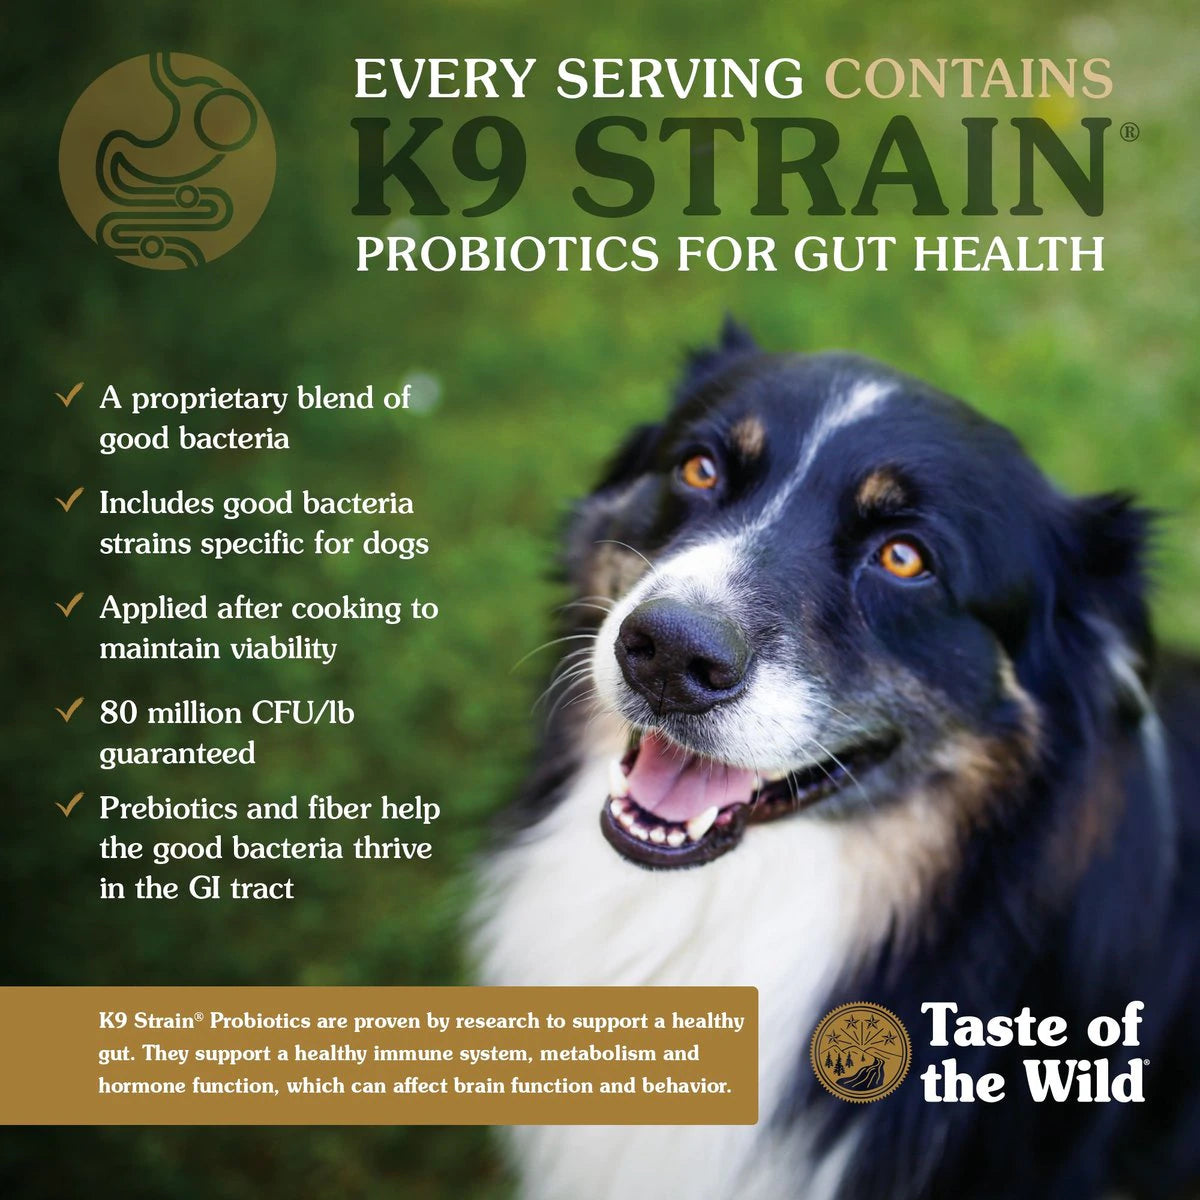 Taste Of The Wild Pine Forest Grain-Free Dog Food - Mutts & Co.